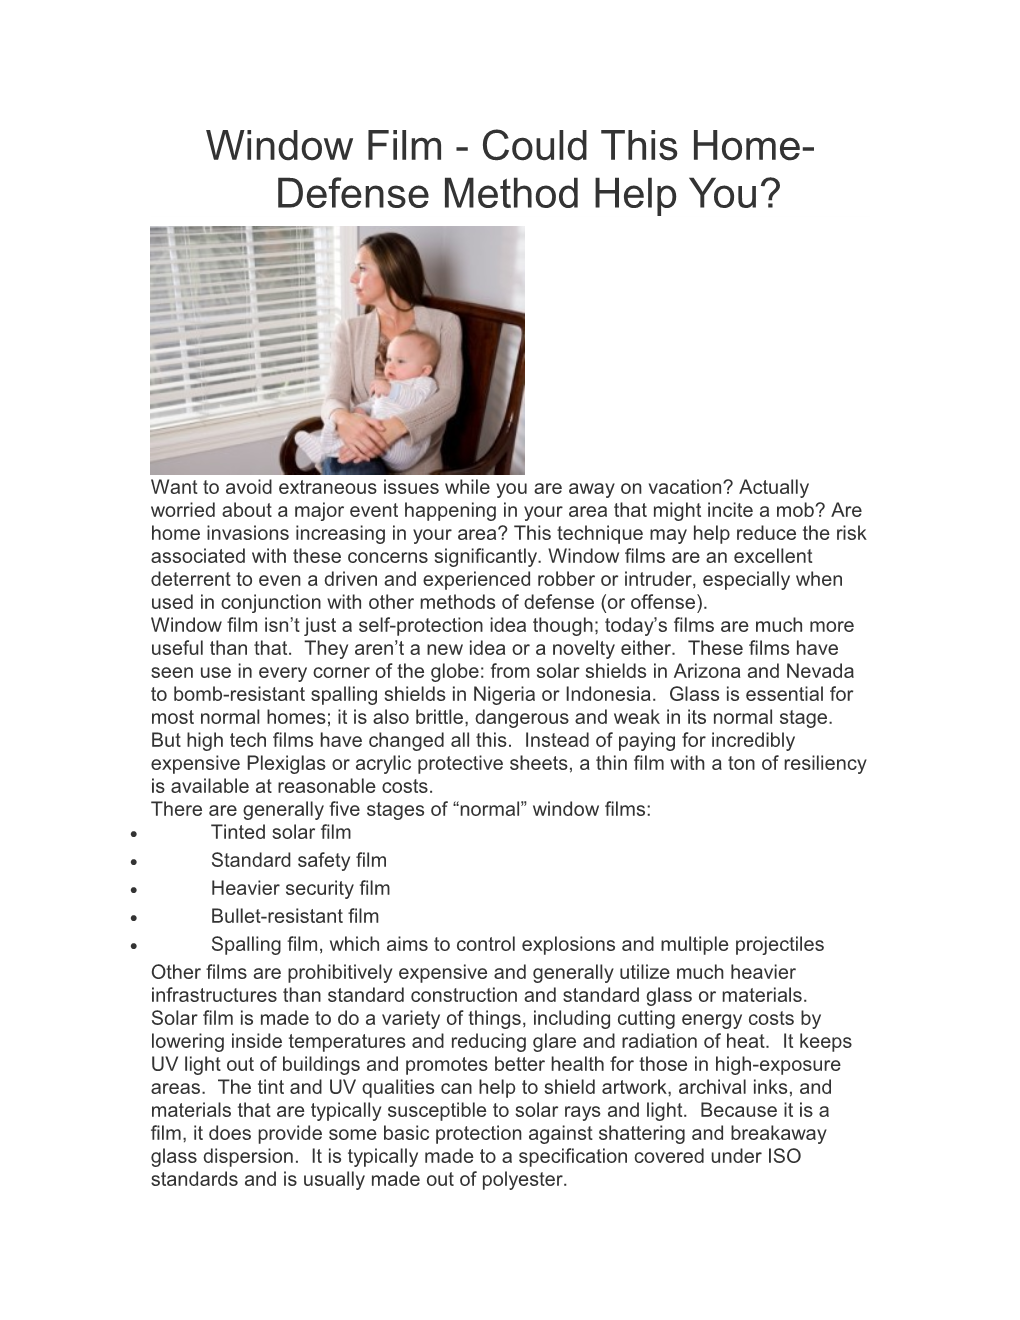 Window Film - Could This Home-Defense Method Help You